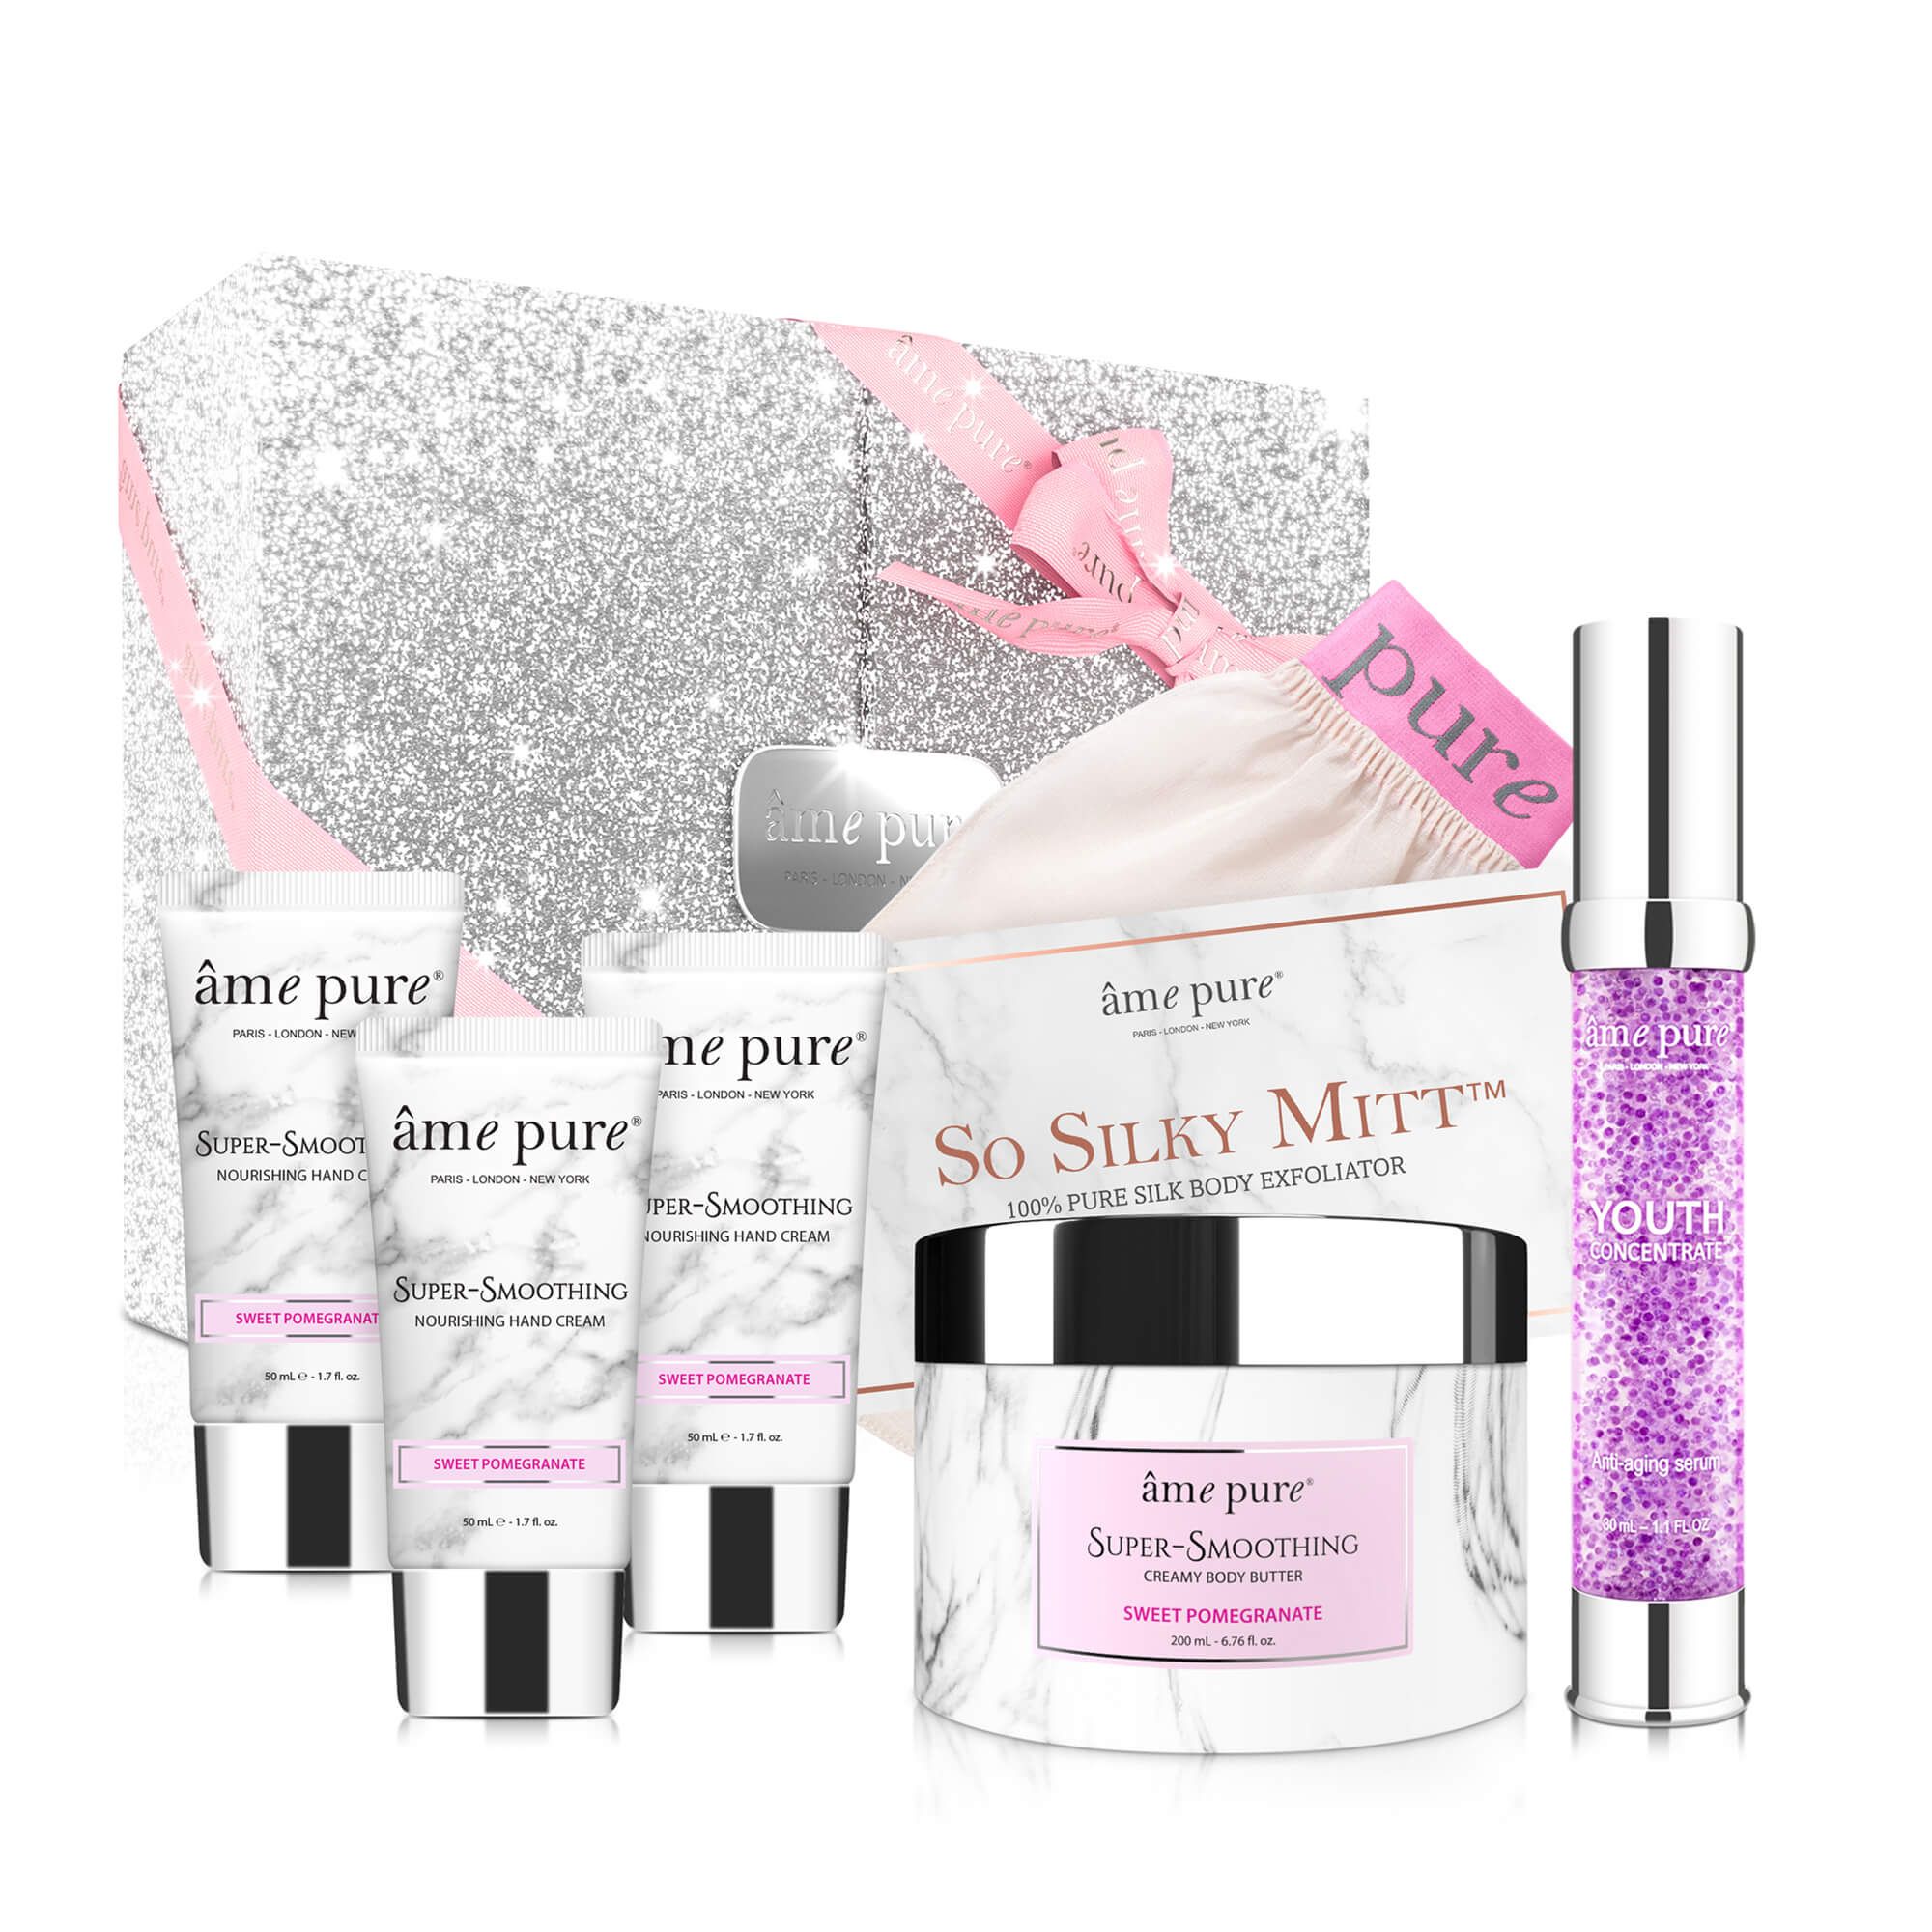 âme pure "I WILL TAKE CARE OF YOU" Geschenk-Set